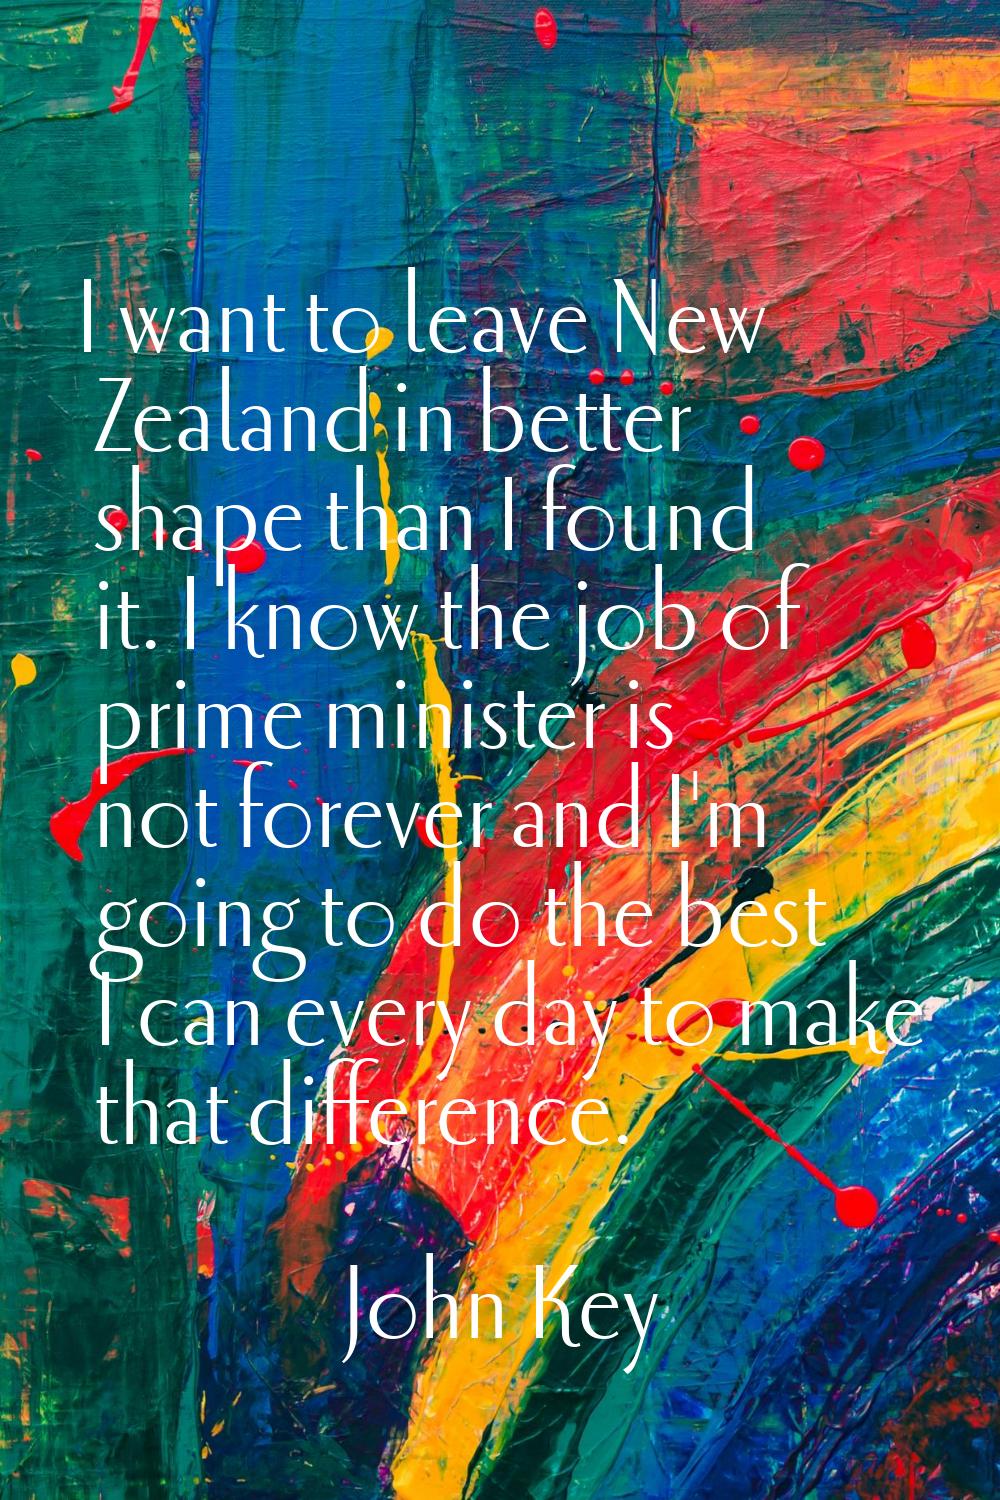 I want to leave New Zealand in better shape than I found it. I know the job of prime minister is no